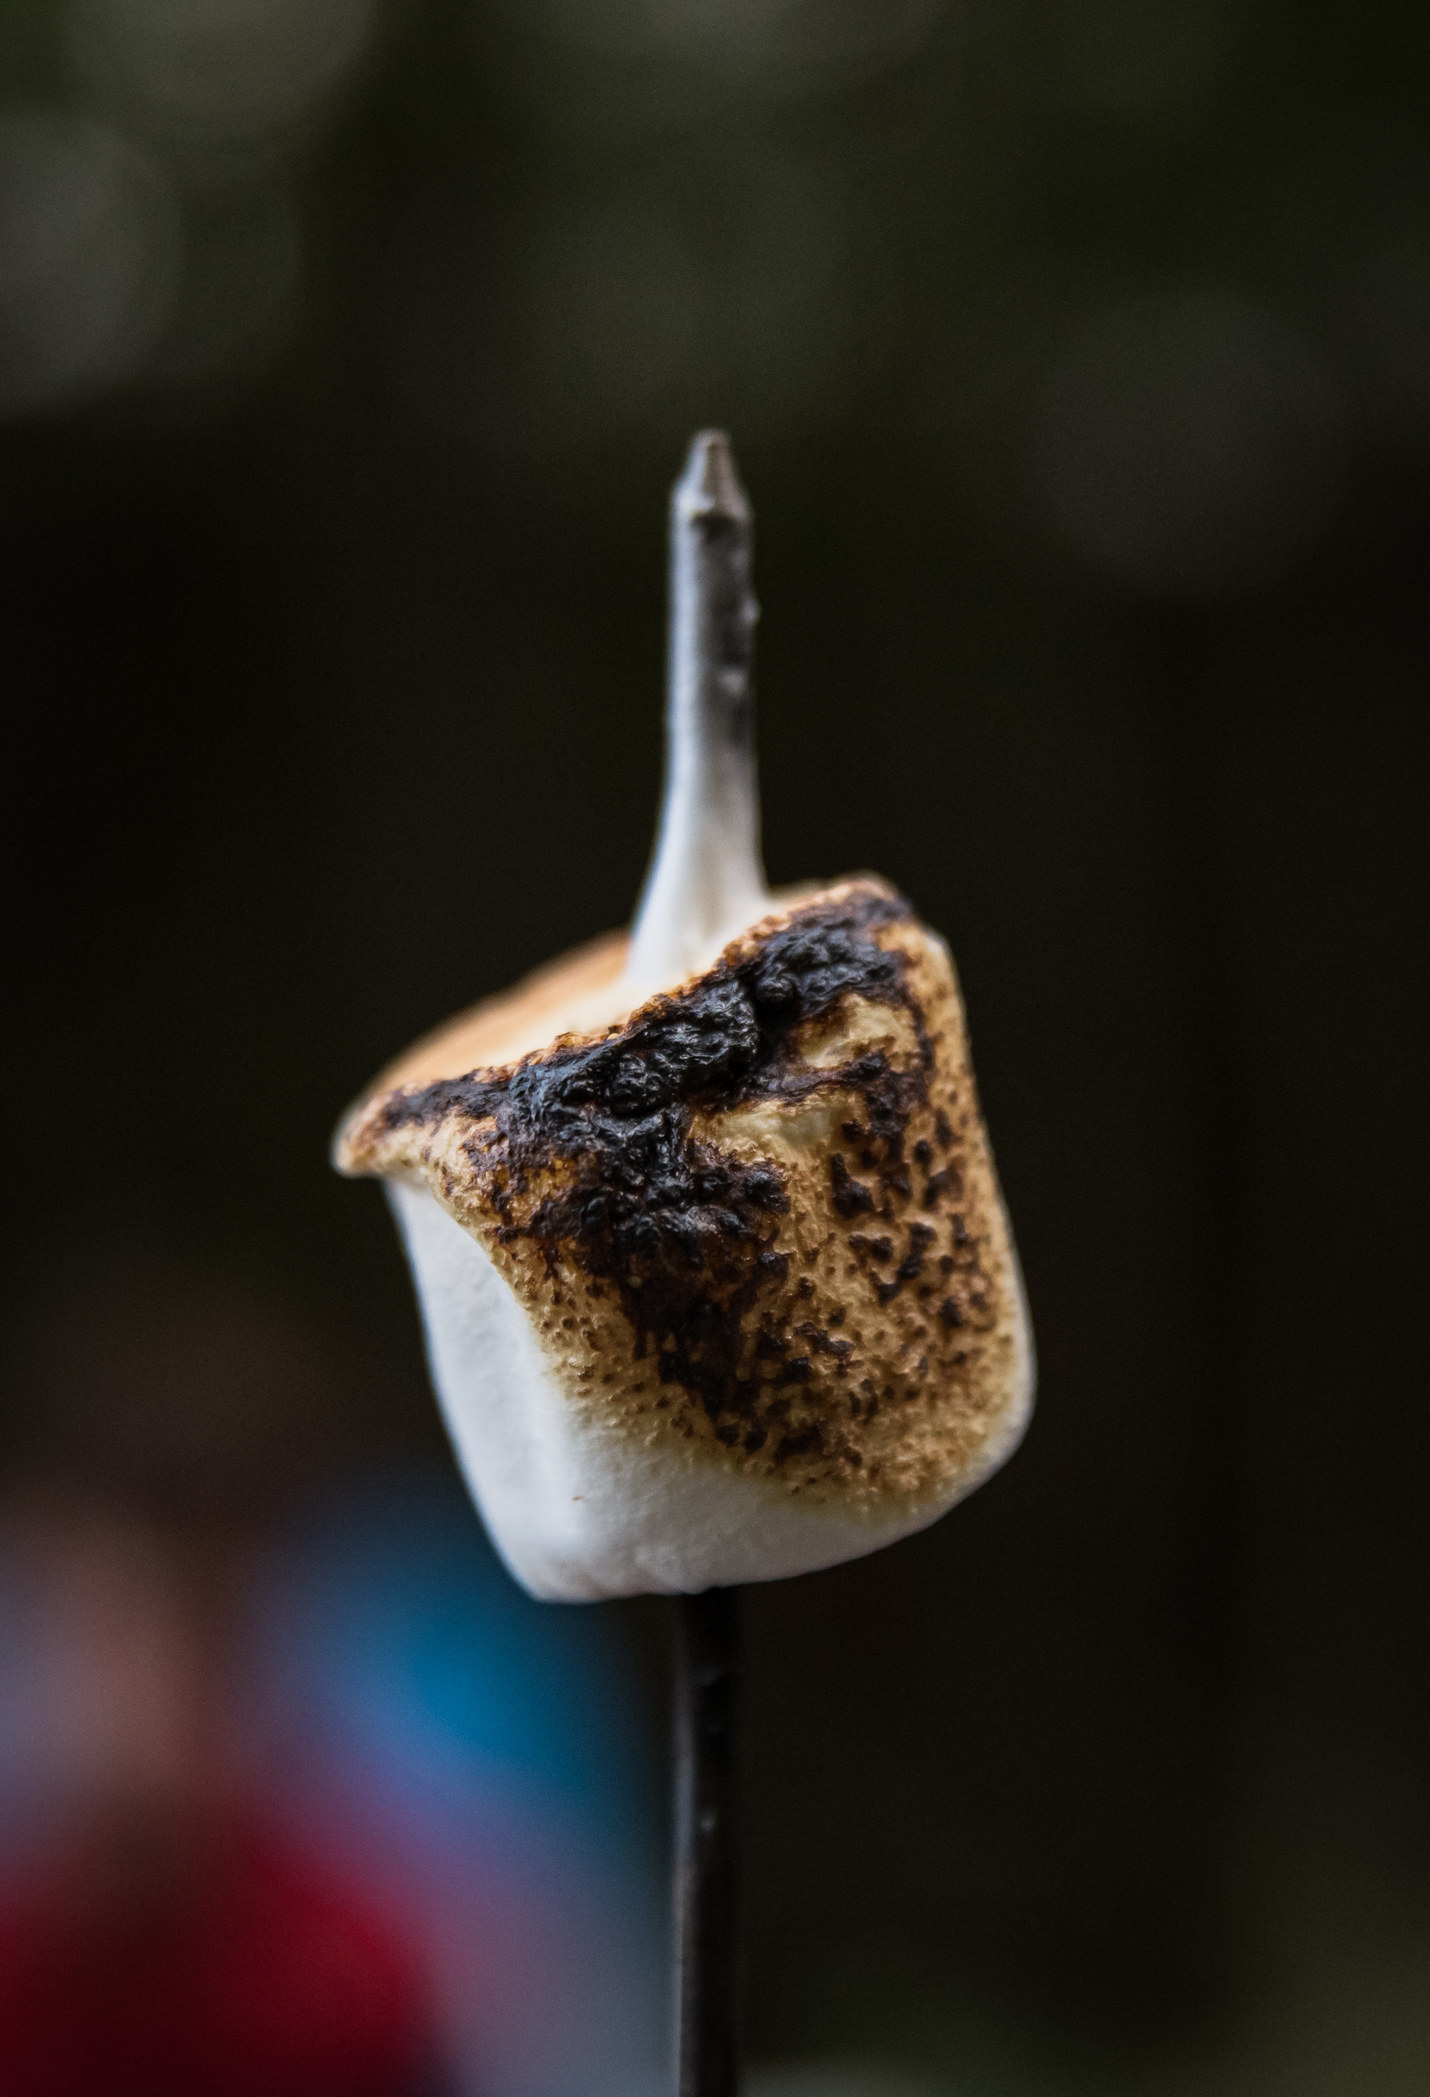 A toasted marshmallow on a stick.